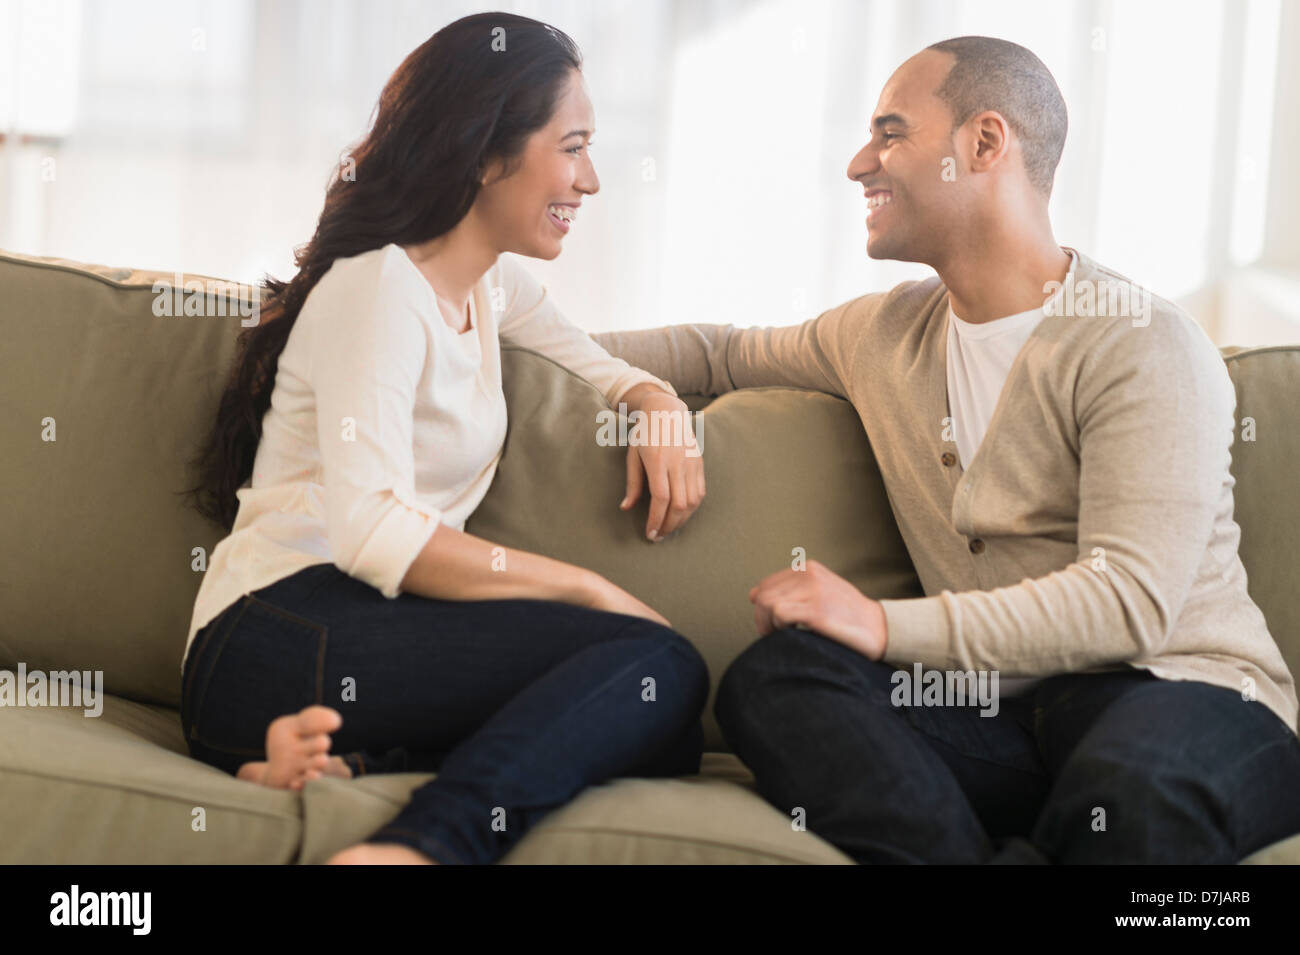 Portrait of young couple sitting on couch Banque D'Images